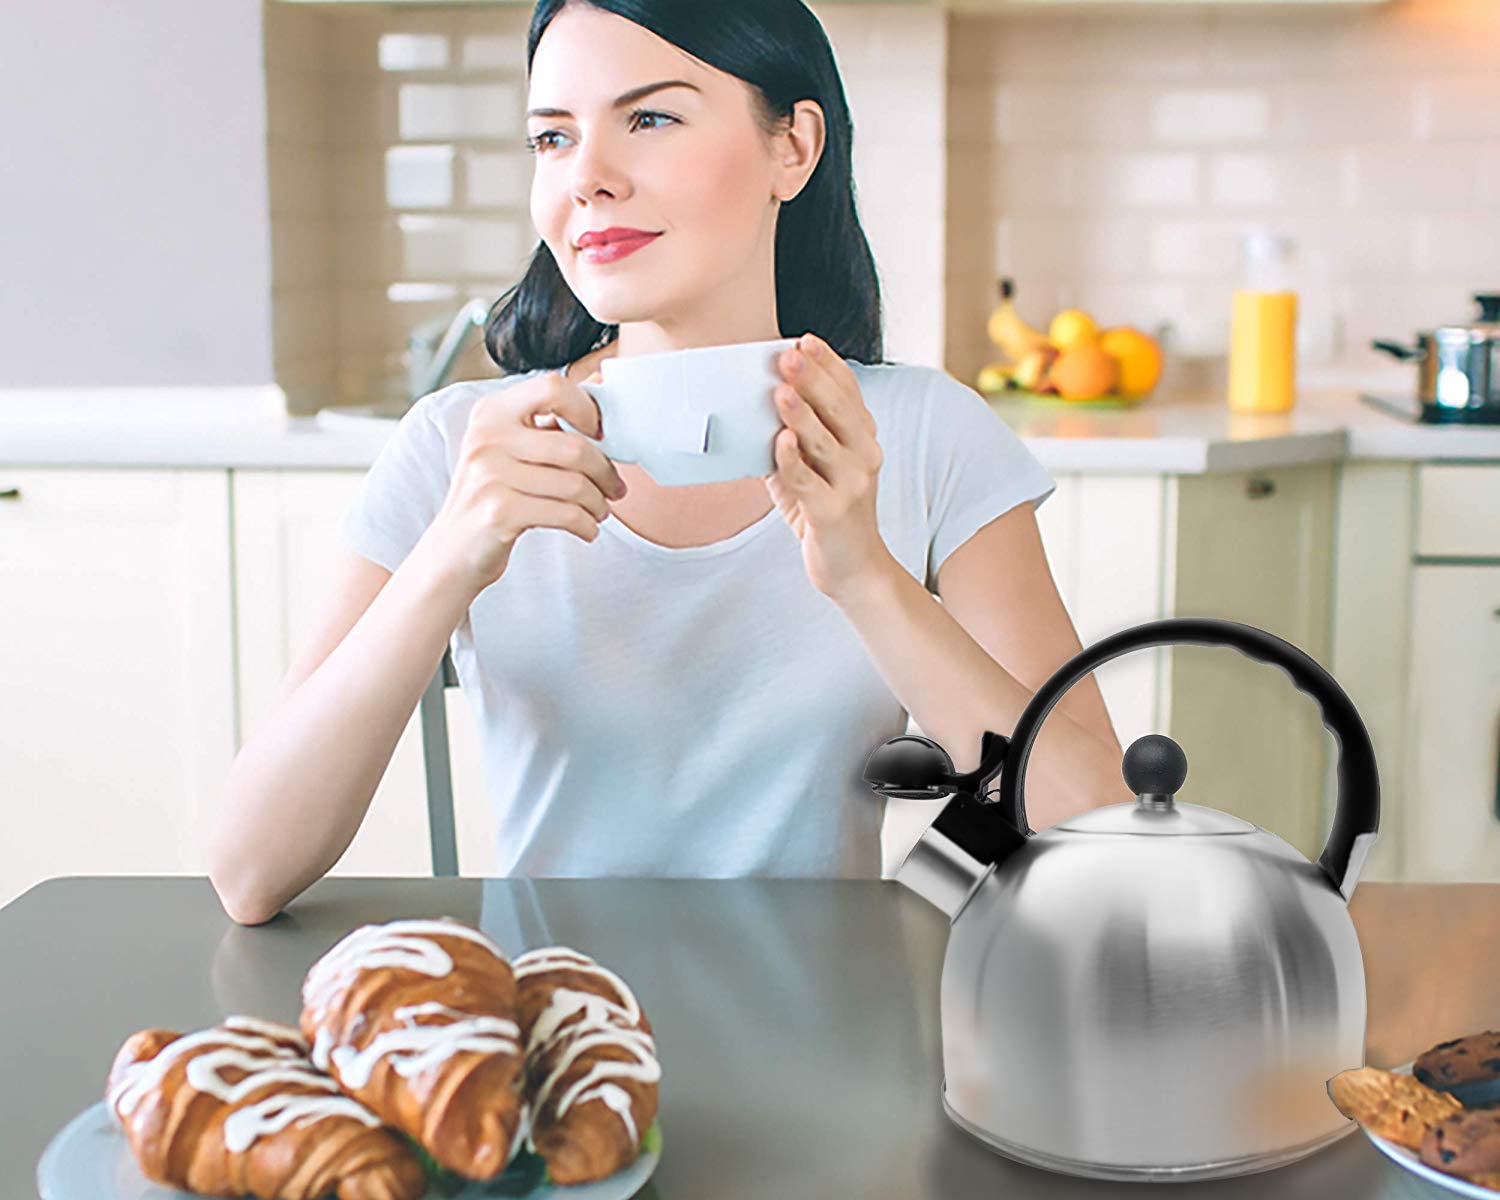 Rorence Stainless Steel Whistling kettle: 2.5 Quart with Capsule